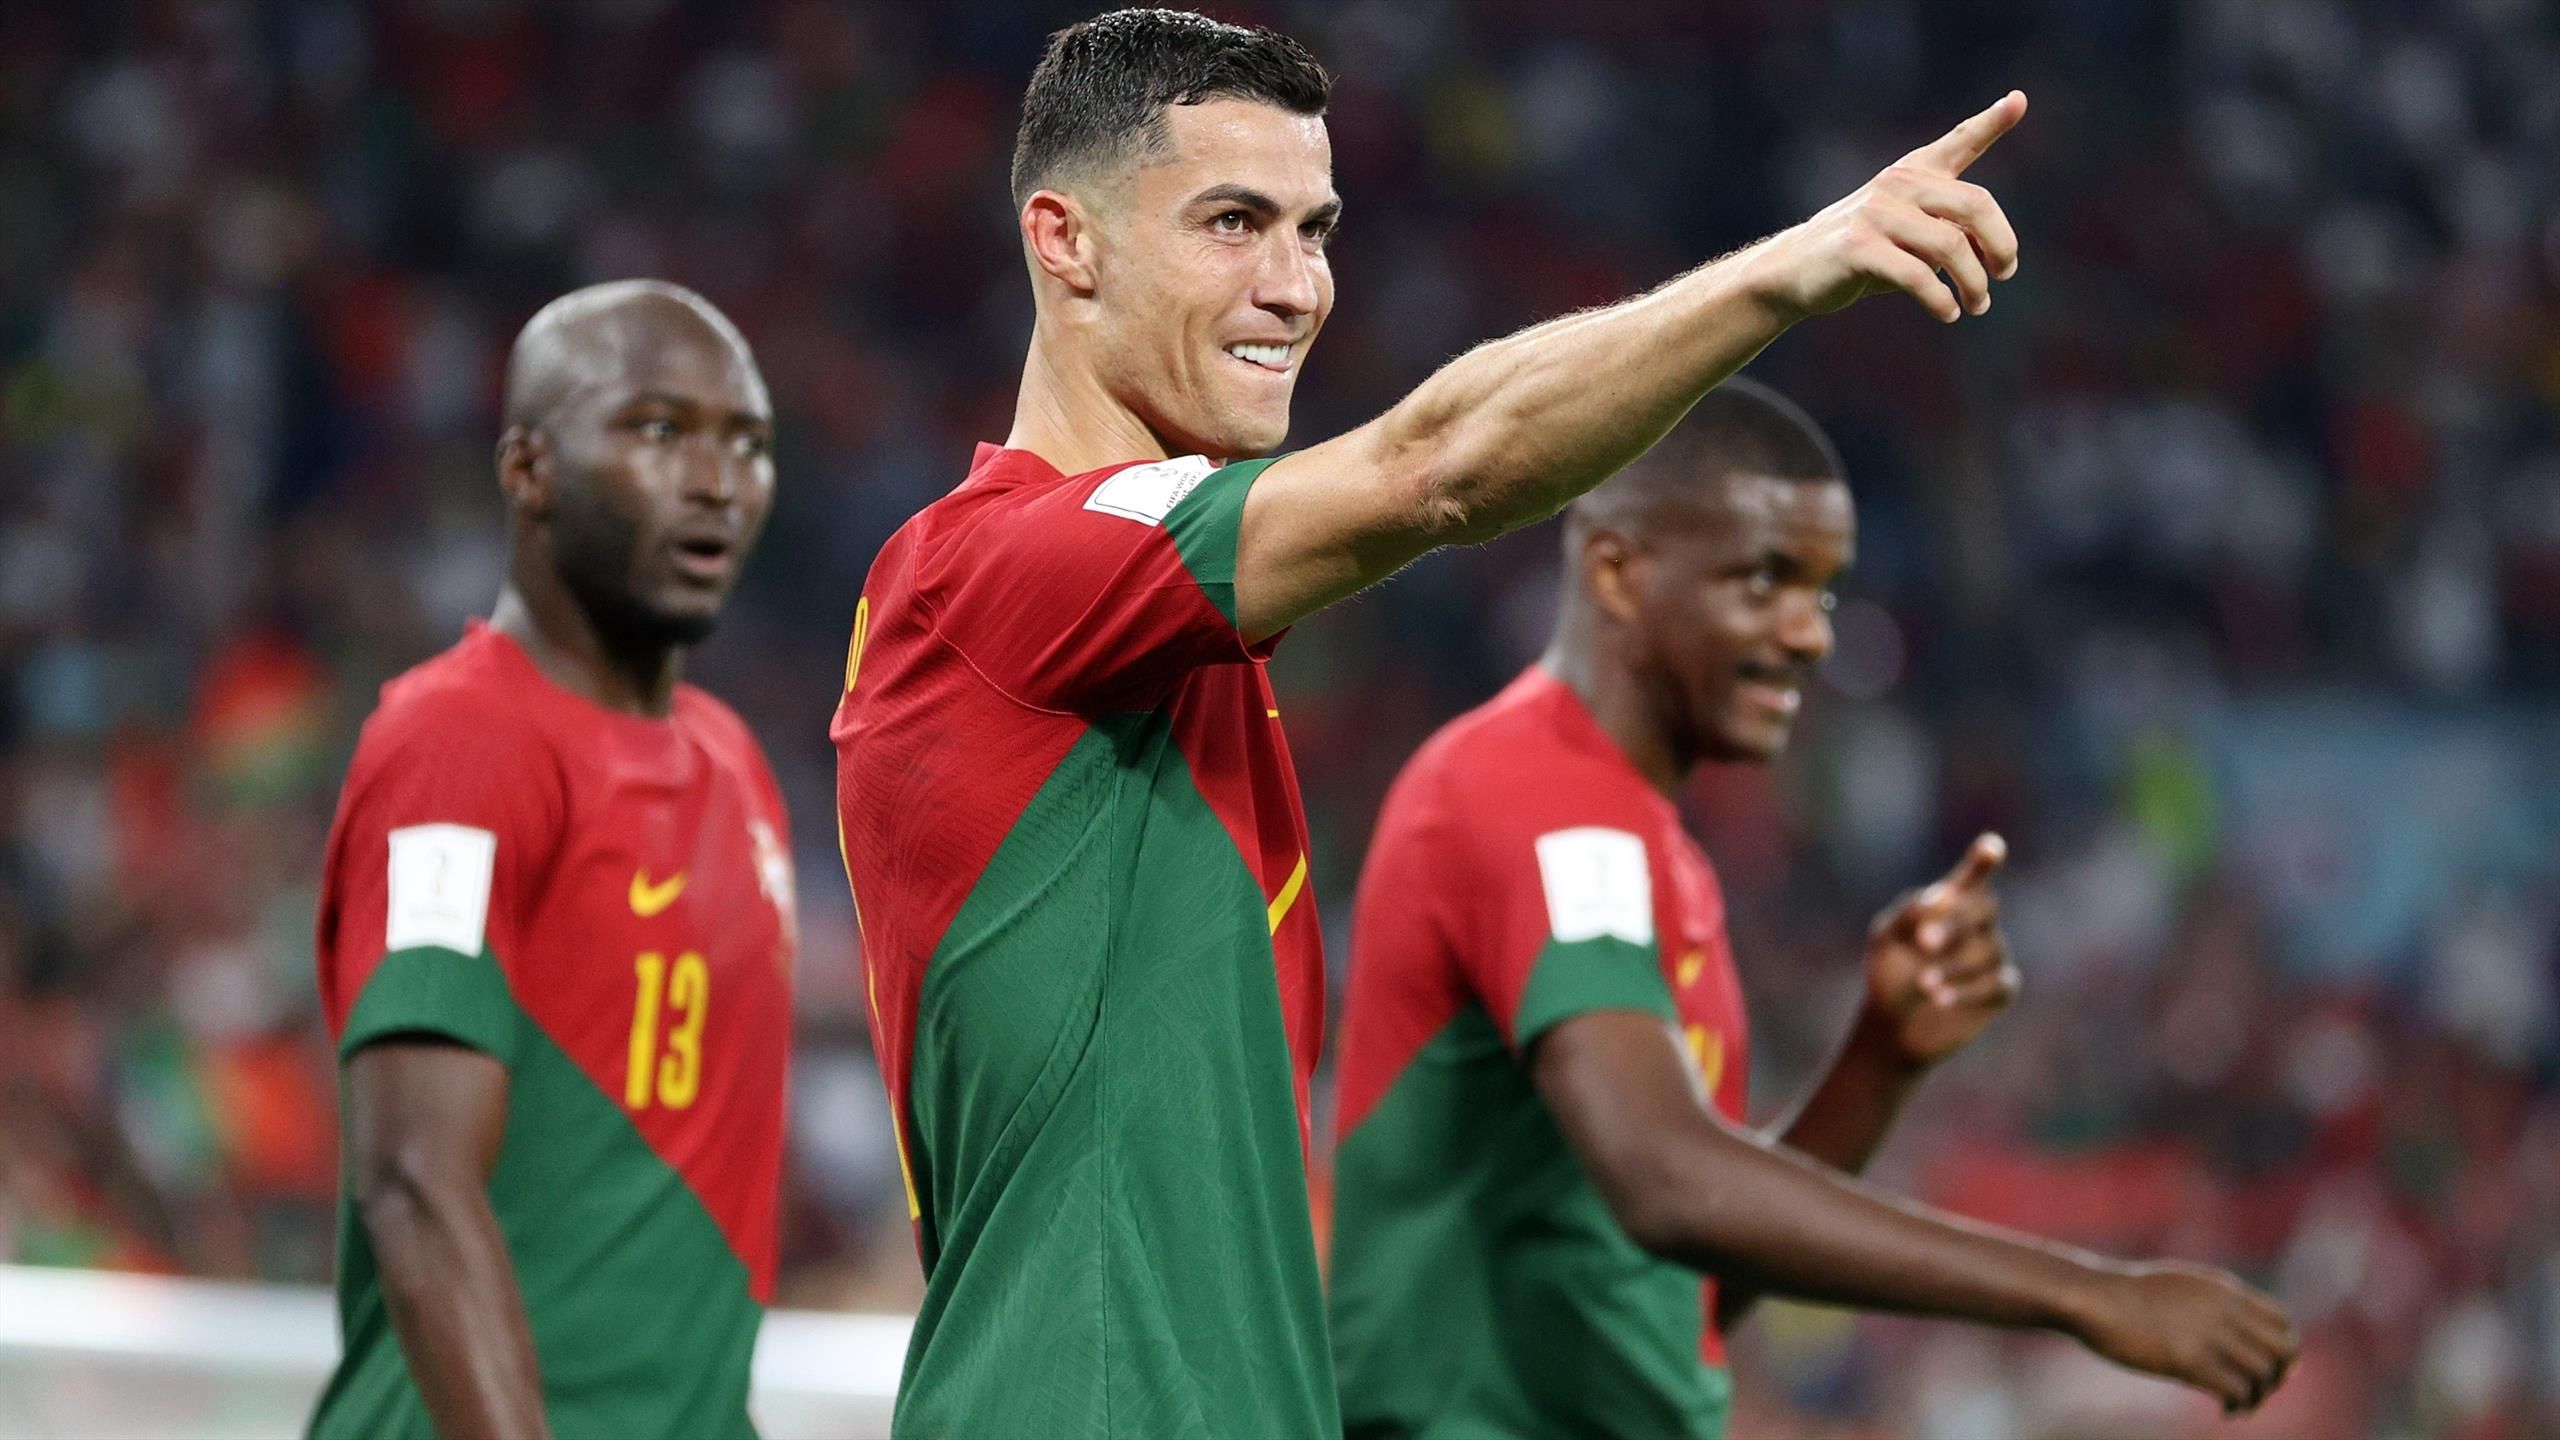 Portugal 3-2 Ghana Cristiano Ronaldo sets World Cup record despite Ghana fightback in Group H thriller